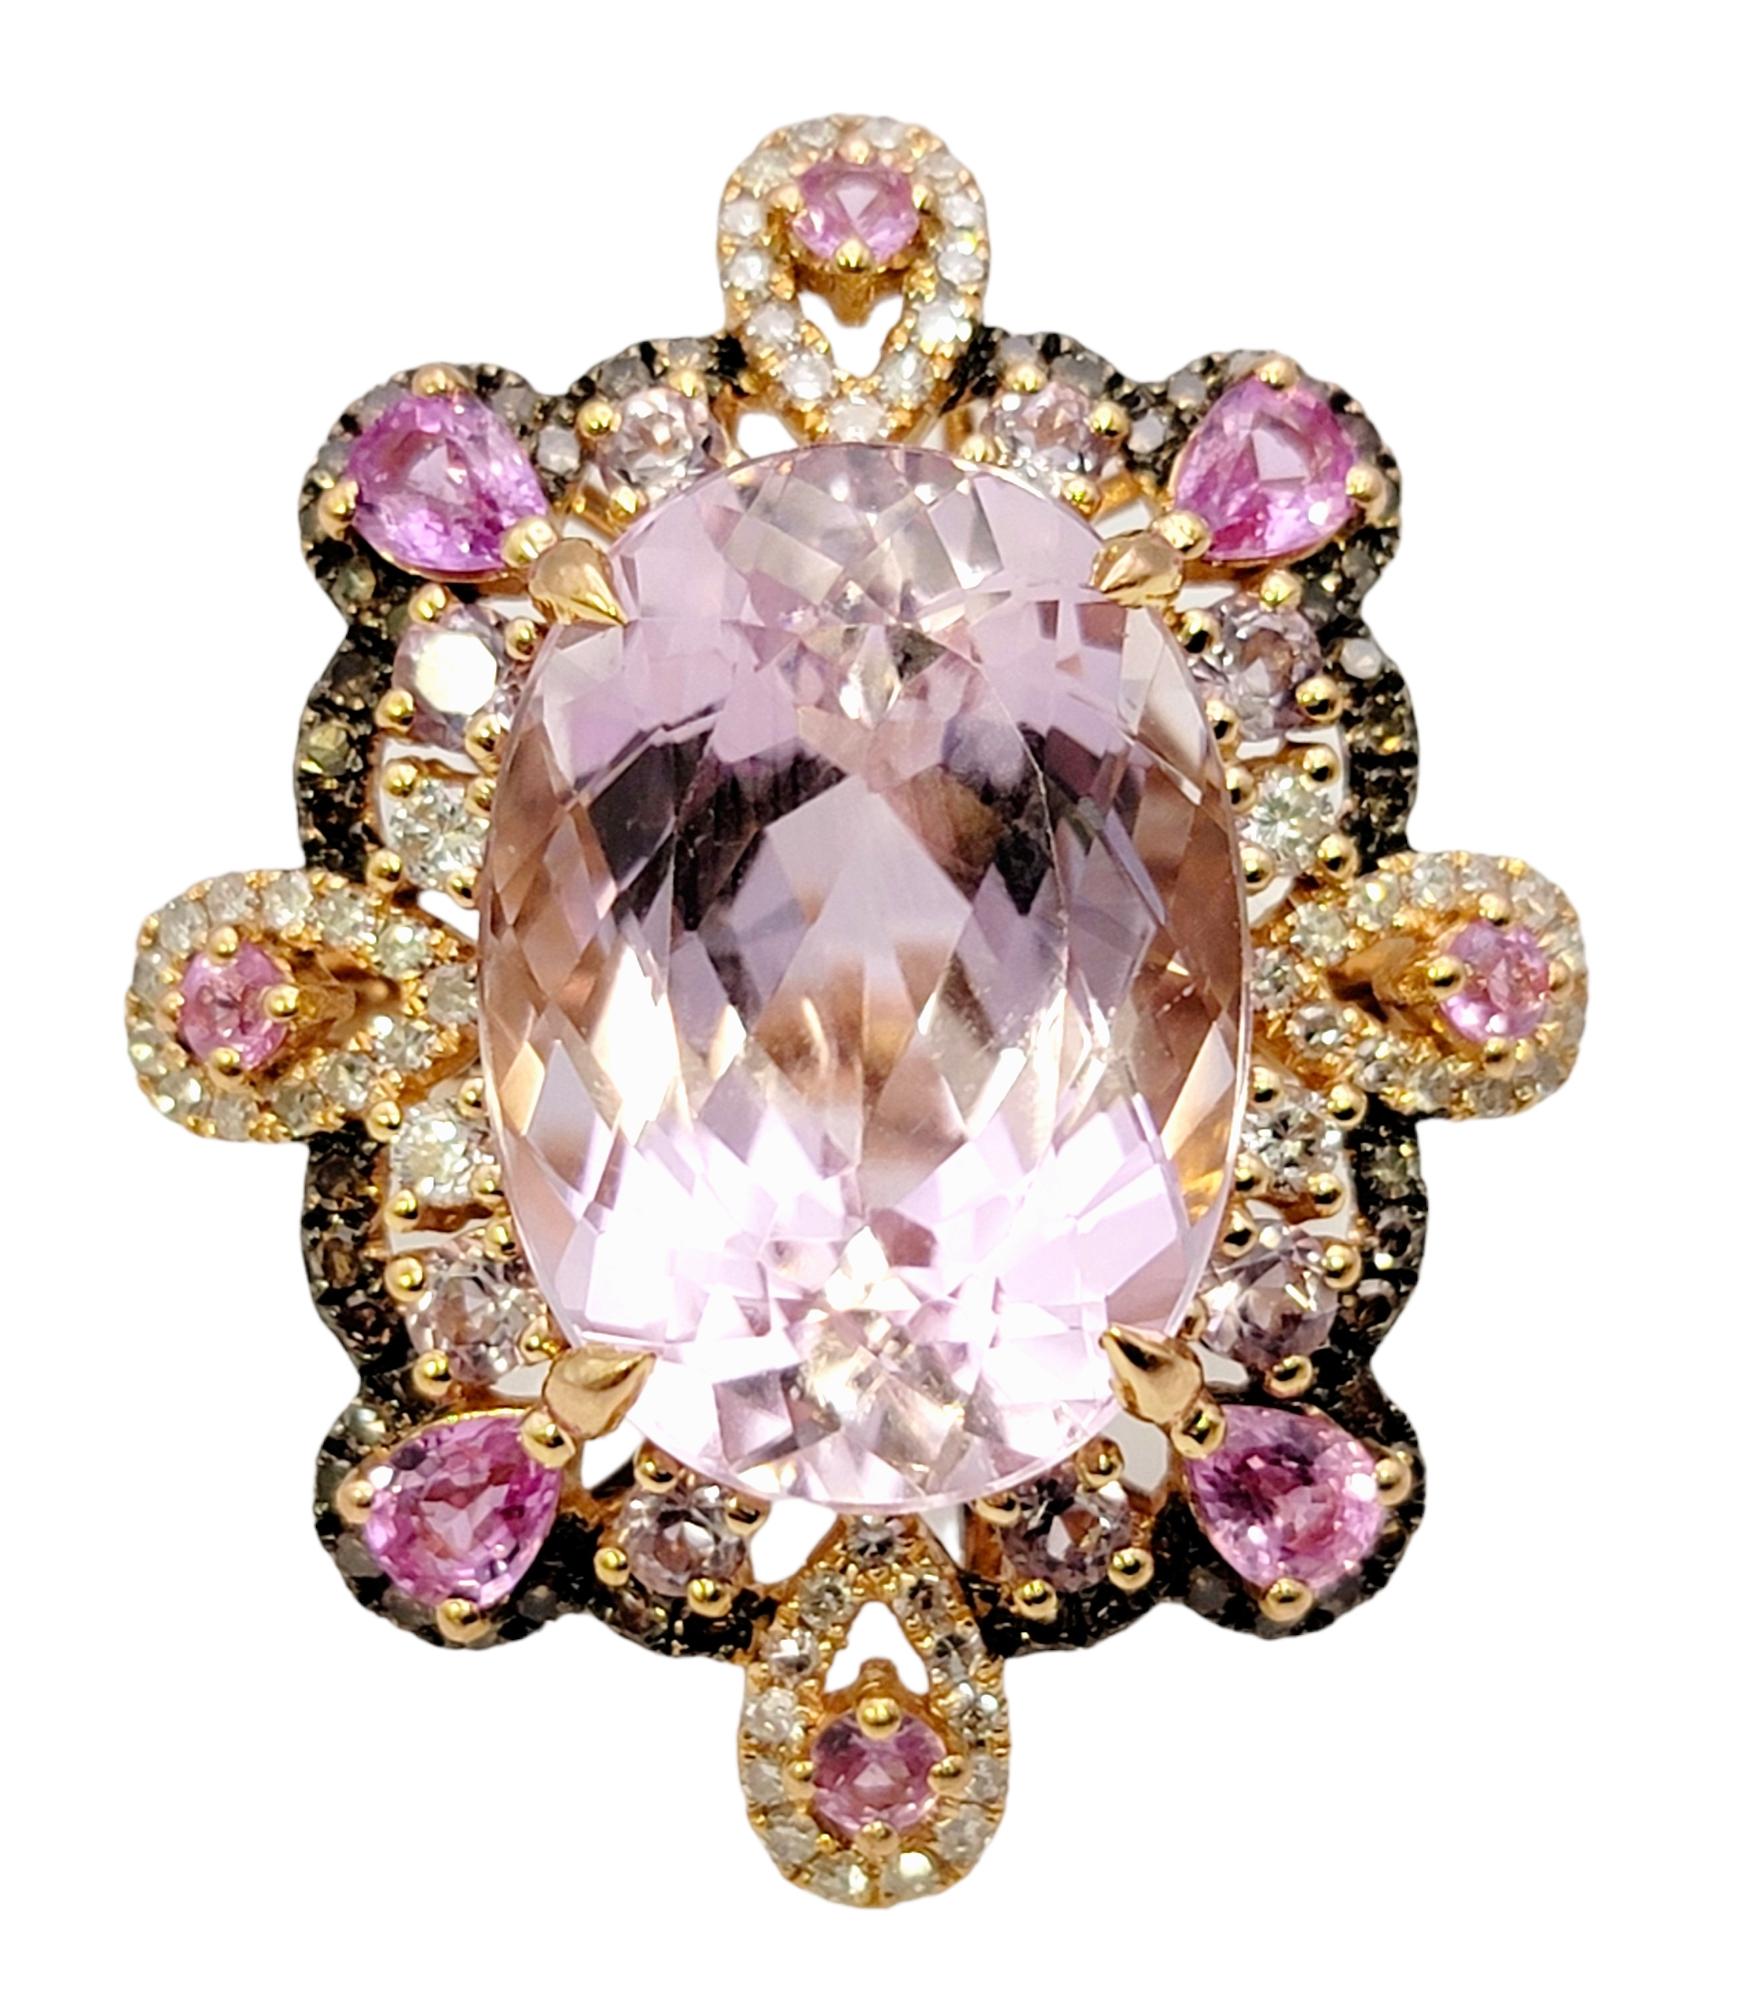 Ring size: 6.5

This stunningly sparkly, ultra feminine cocktail ring has all the wow factor you've been looking for! Striking in both size and color, this remarkable piece will not go unnoticed. 

Featured here is an incredible, rare 16.15 carat